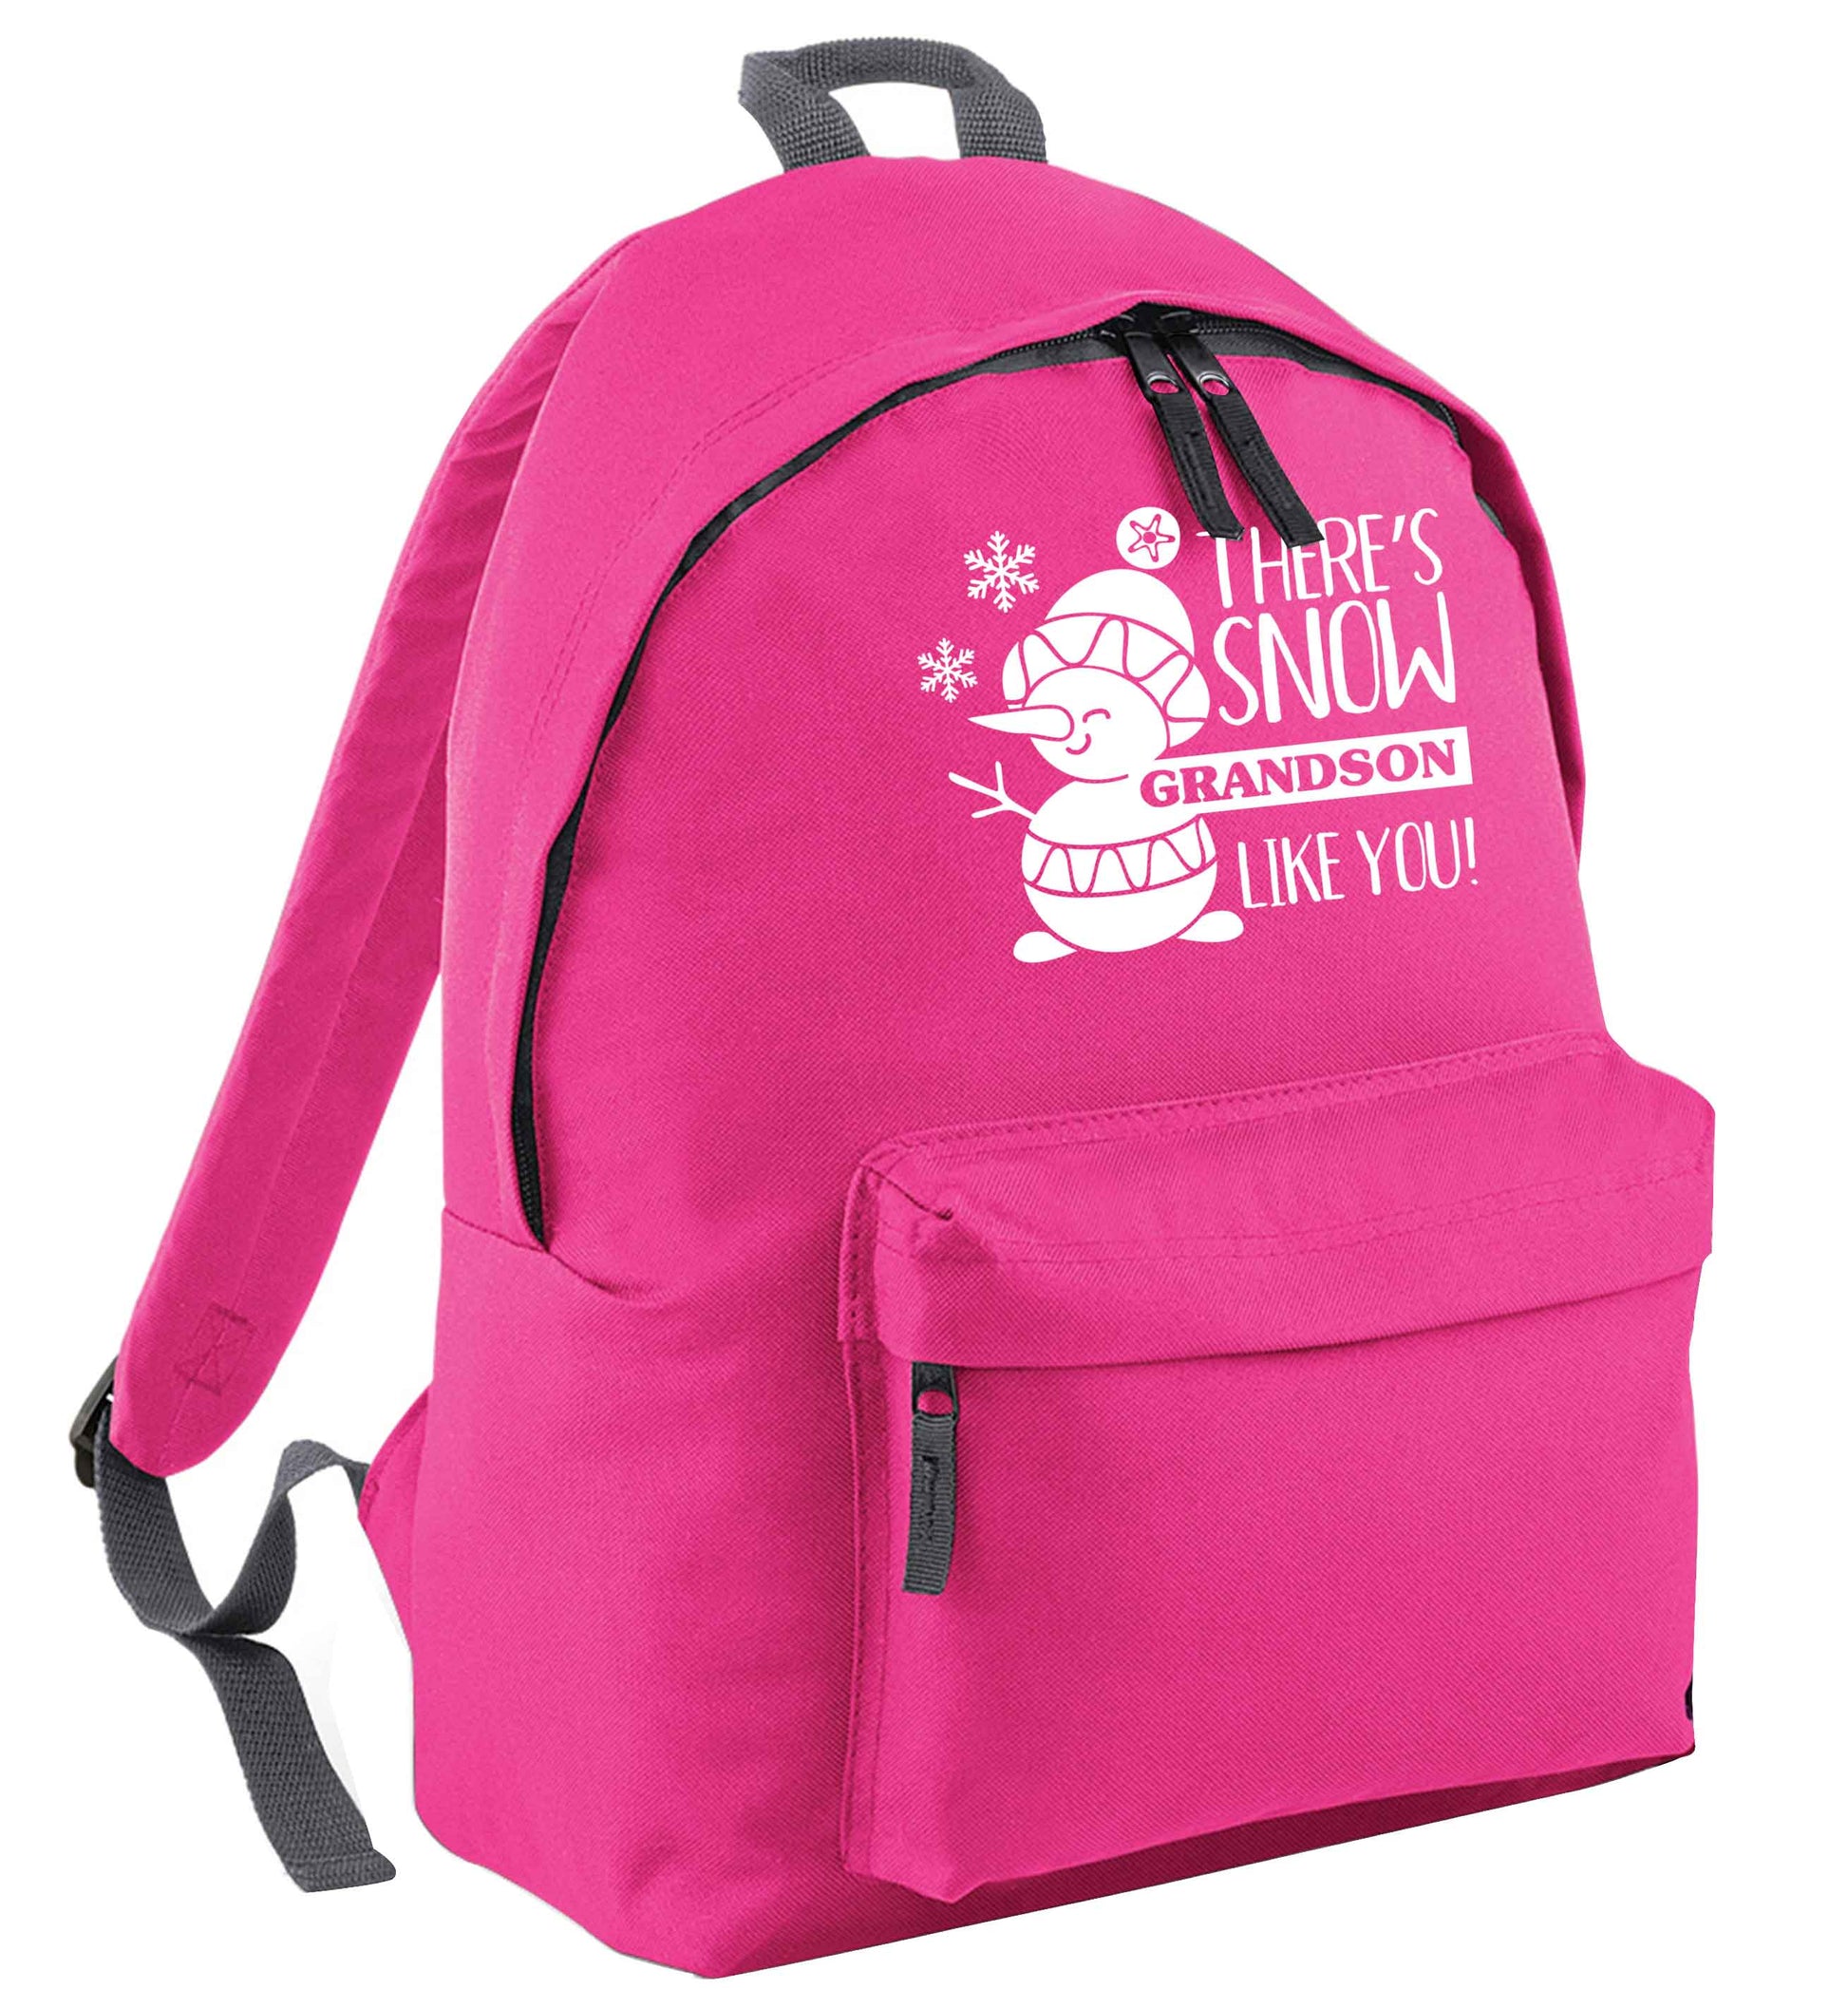 There's snow grandson like you pink adults backpack